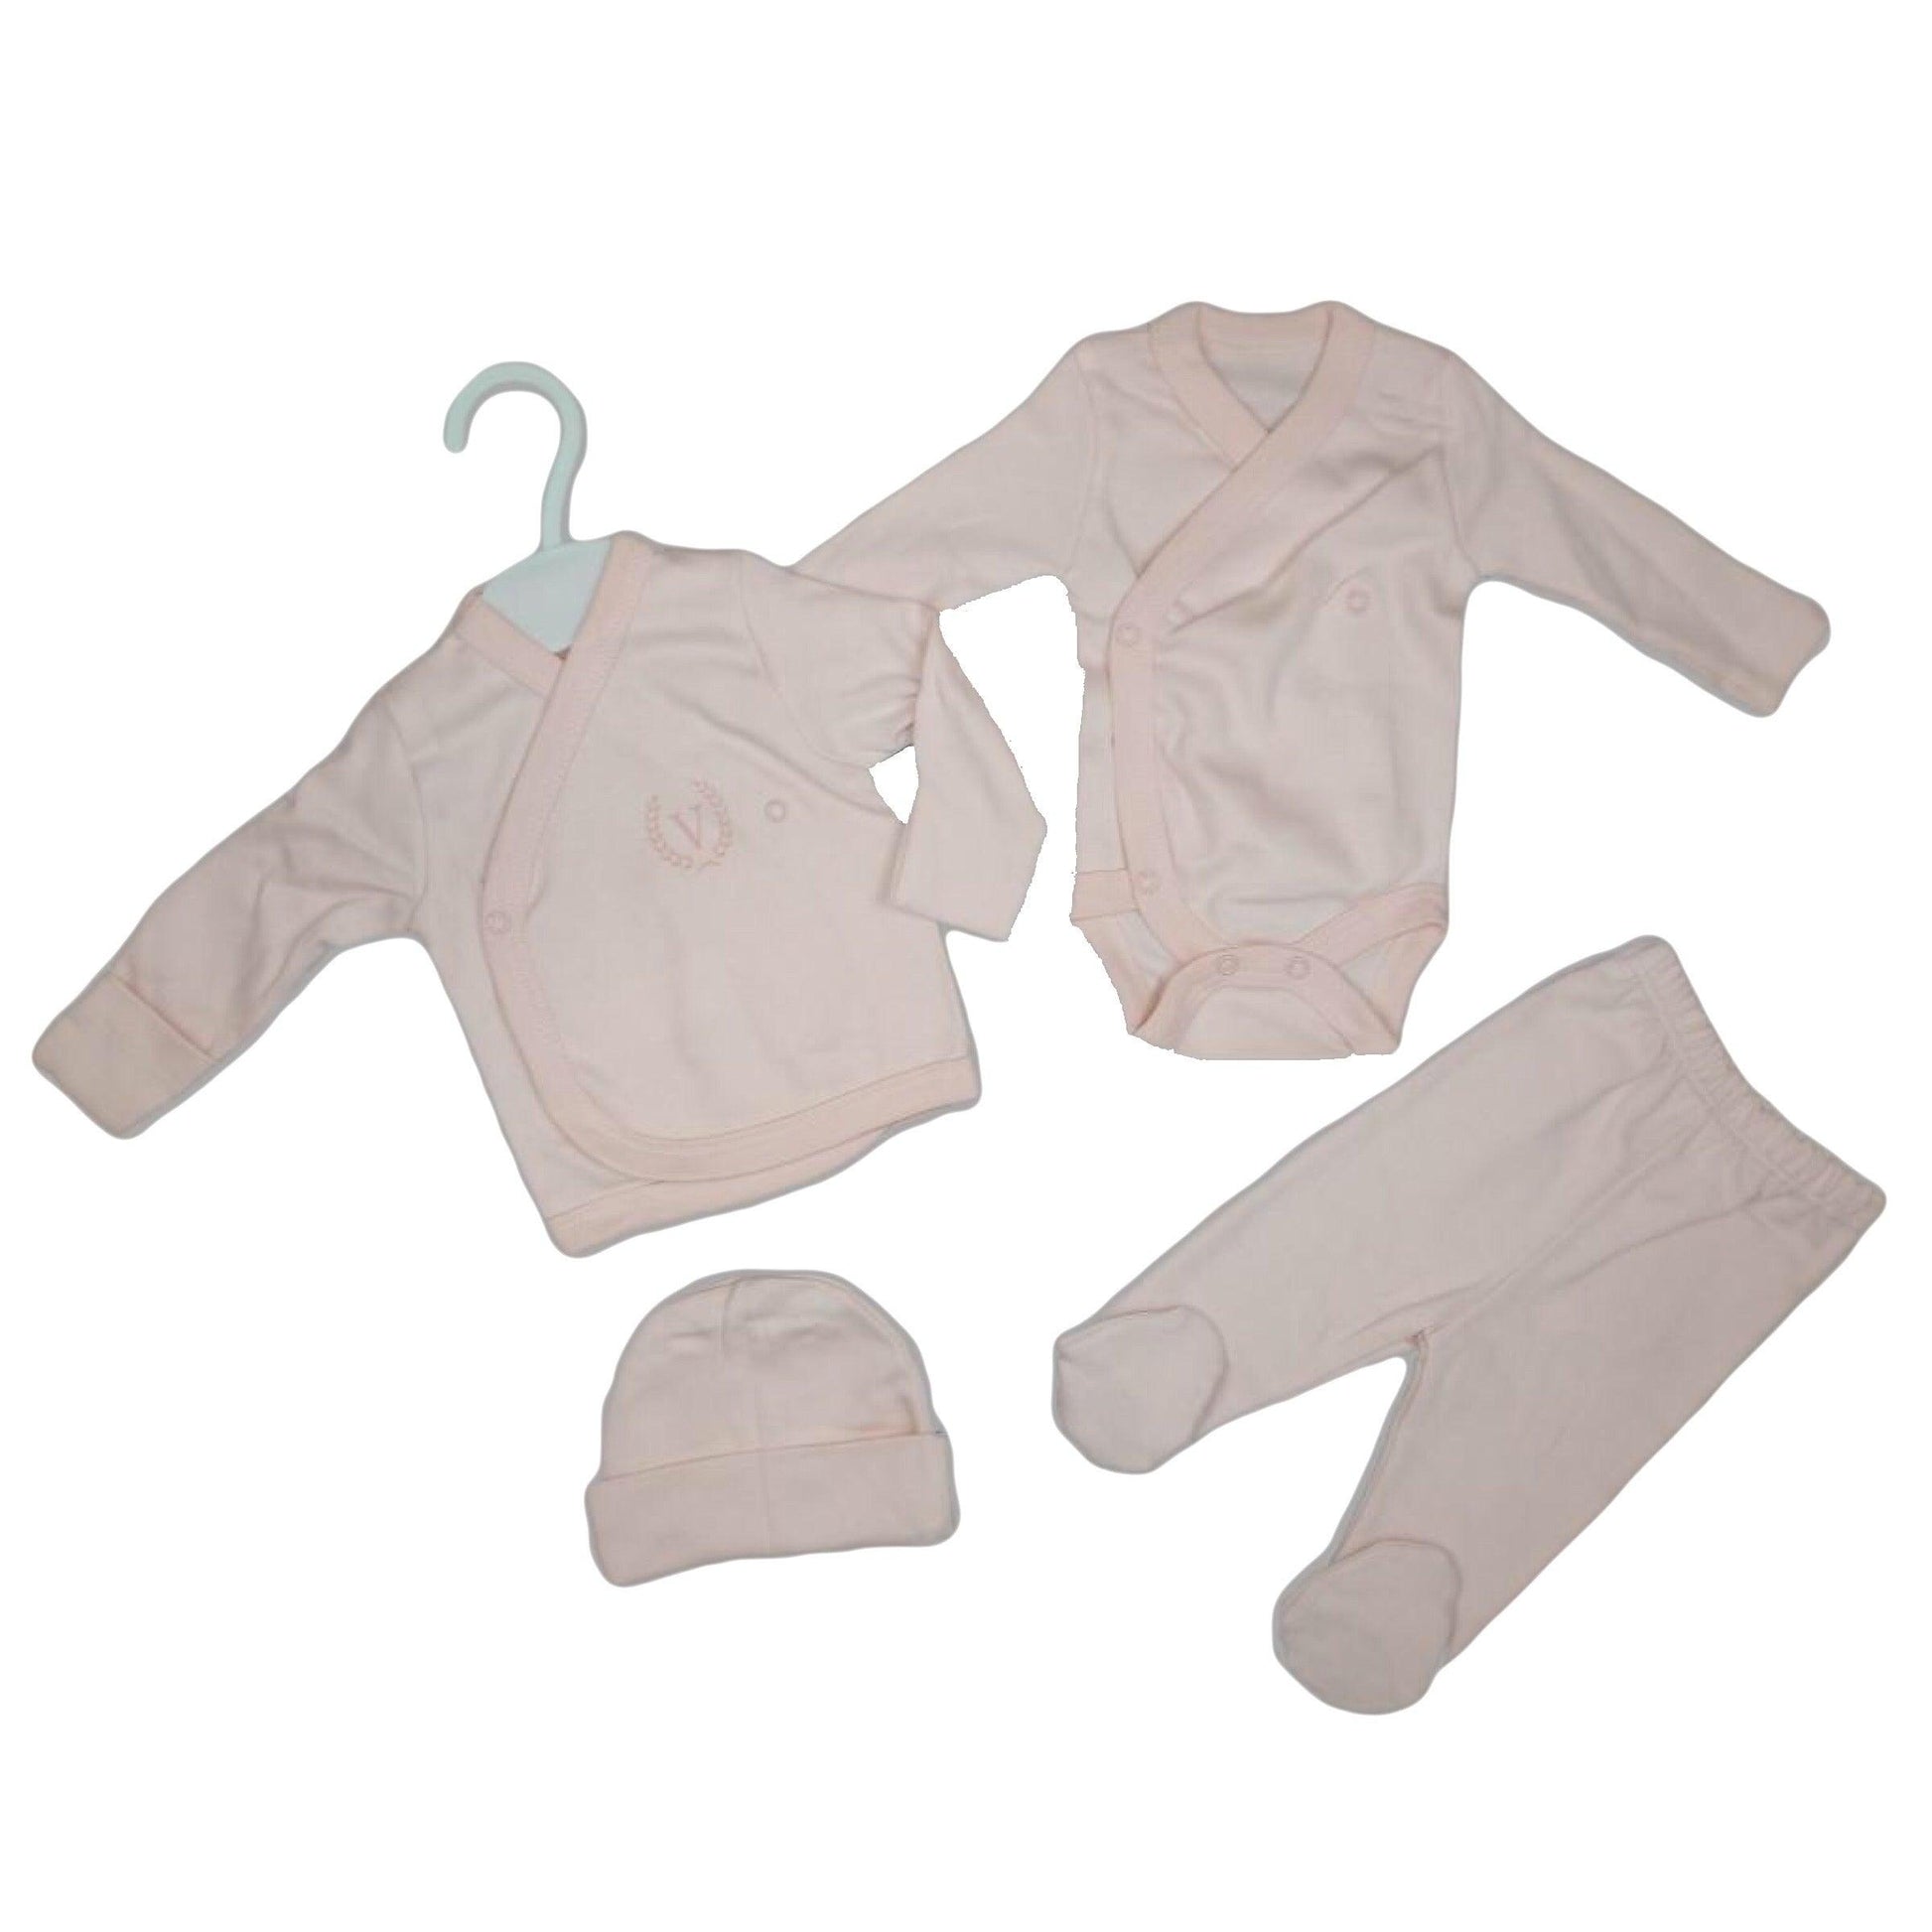 Baby Girls Layette Set | Oscar & Me | Baby & Children’s Clothing & Accessories